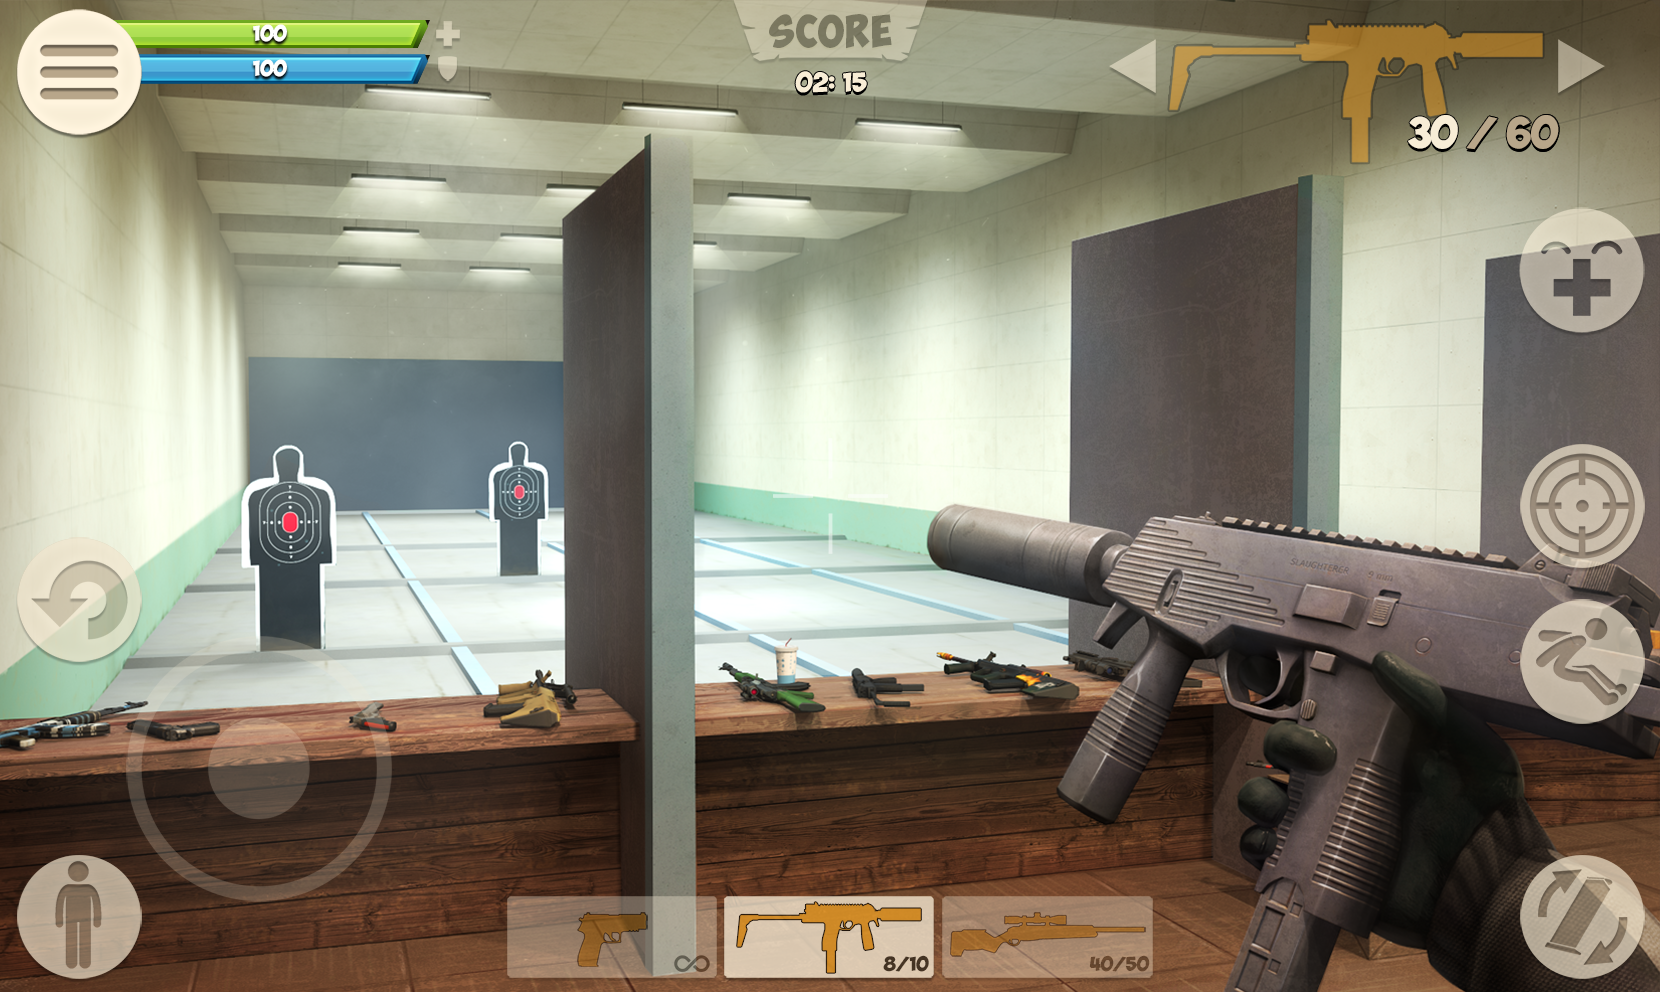 Screenshot 1 of Contra City - Sparatutto online (FPS 3D) 0.9.9